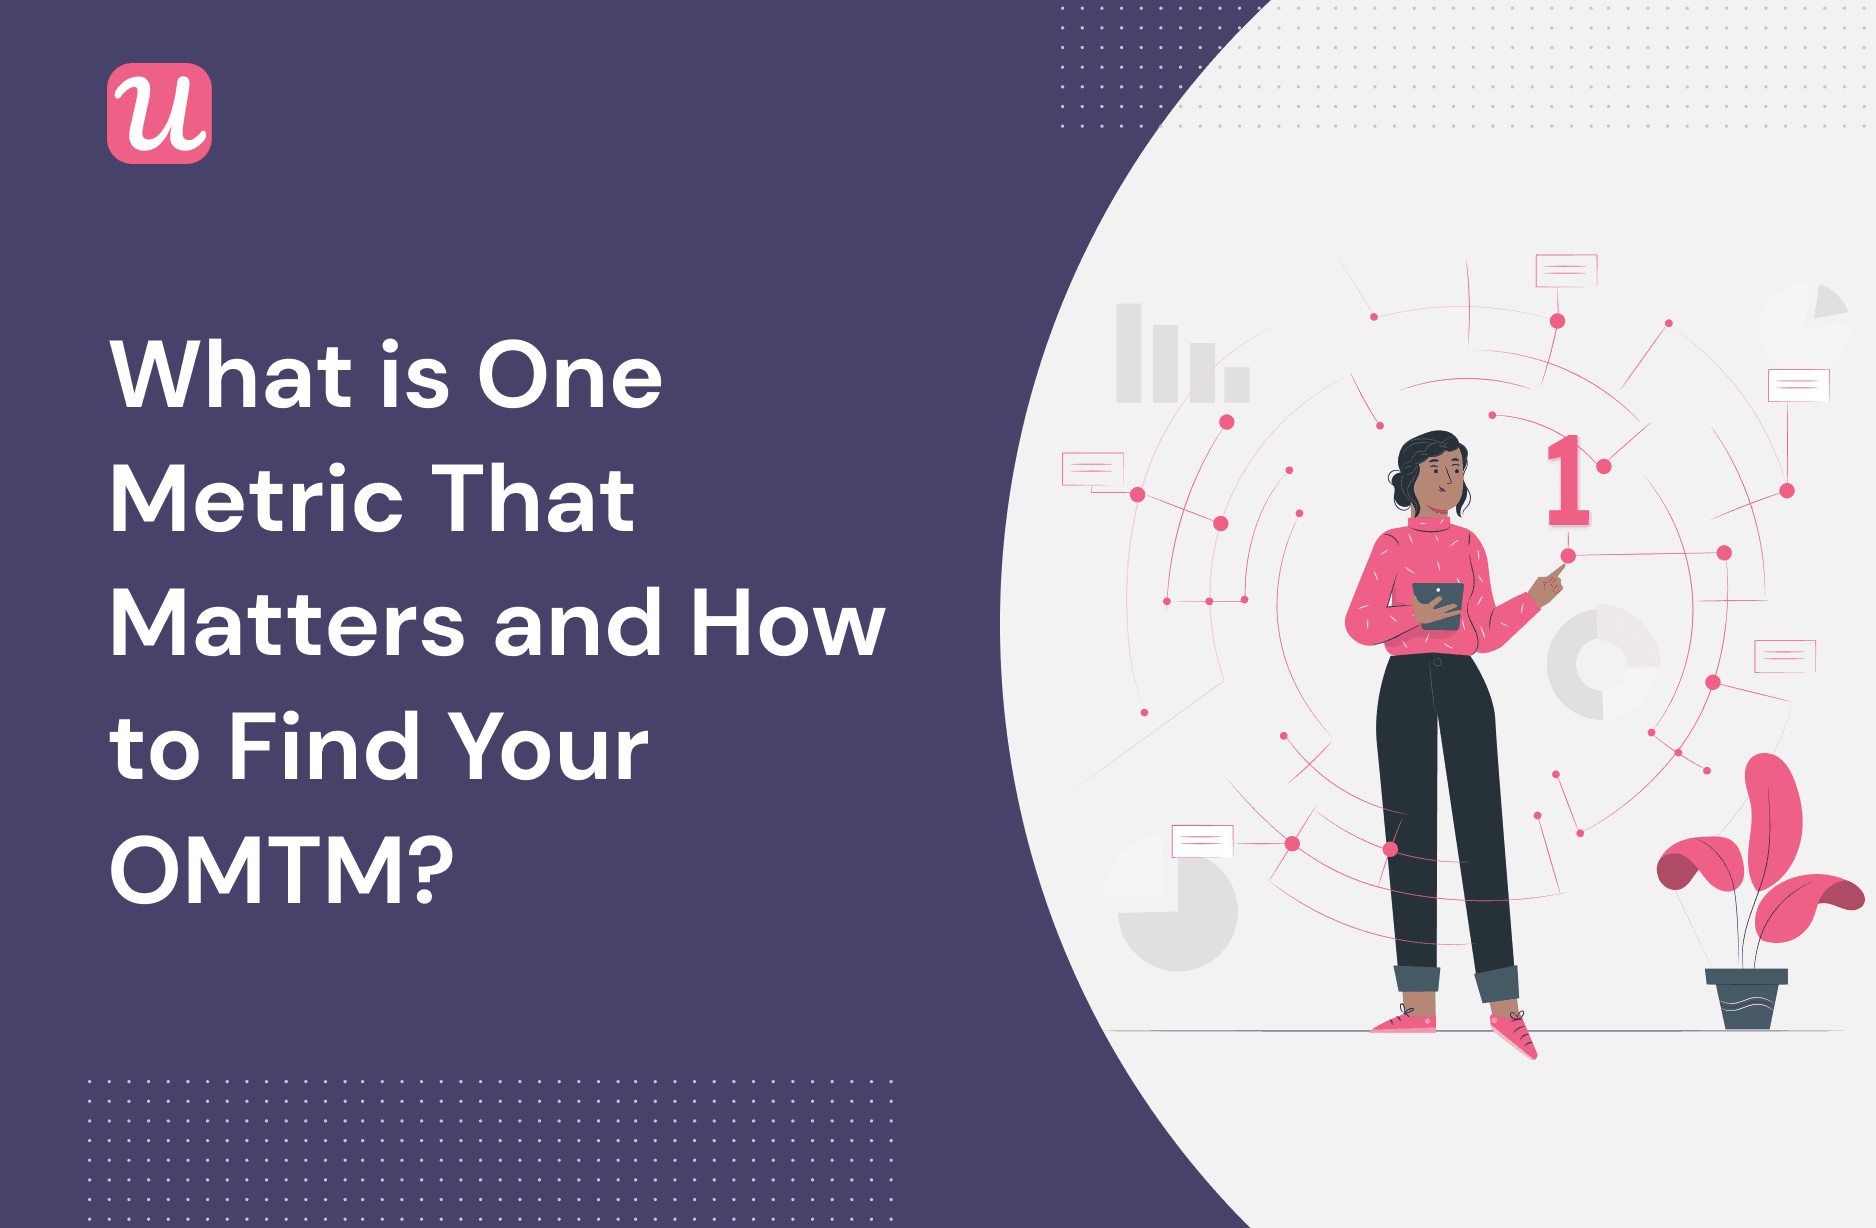 What is One Metric That Matters and how to find your OMTM?